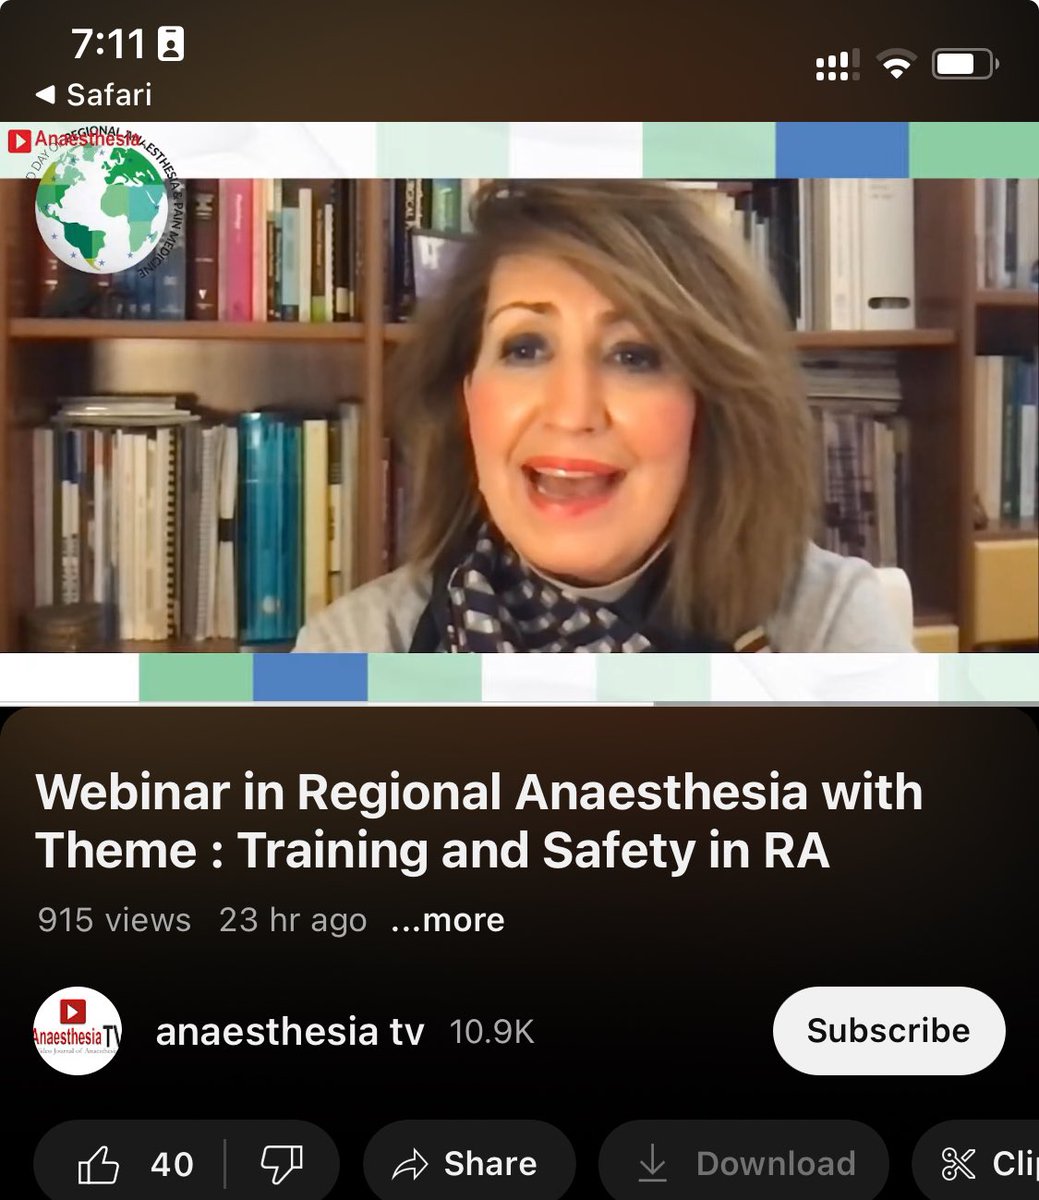 Proud to be a part of the celebrations of the First ever World Regional Anaesthesia and Pain Medicine on 27 th January in an online CME aired on Anaesthesia TV. 
My sincere thanks to ESRA leadership Eleni Moka, Alain Delbos for the wonderful Initiative. 
 #WRAD
#WRAPM
#ESRA
#AORA